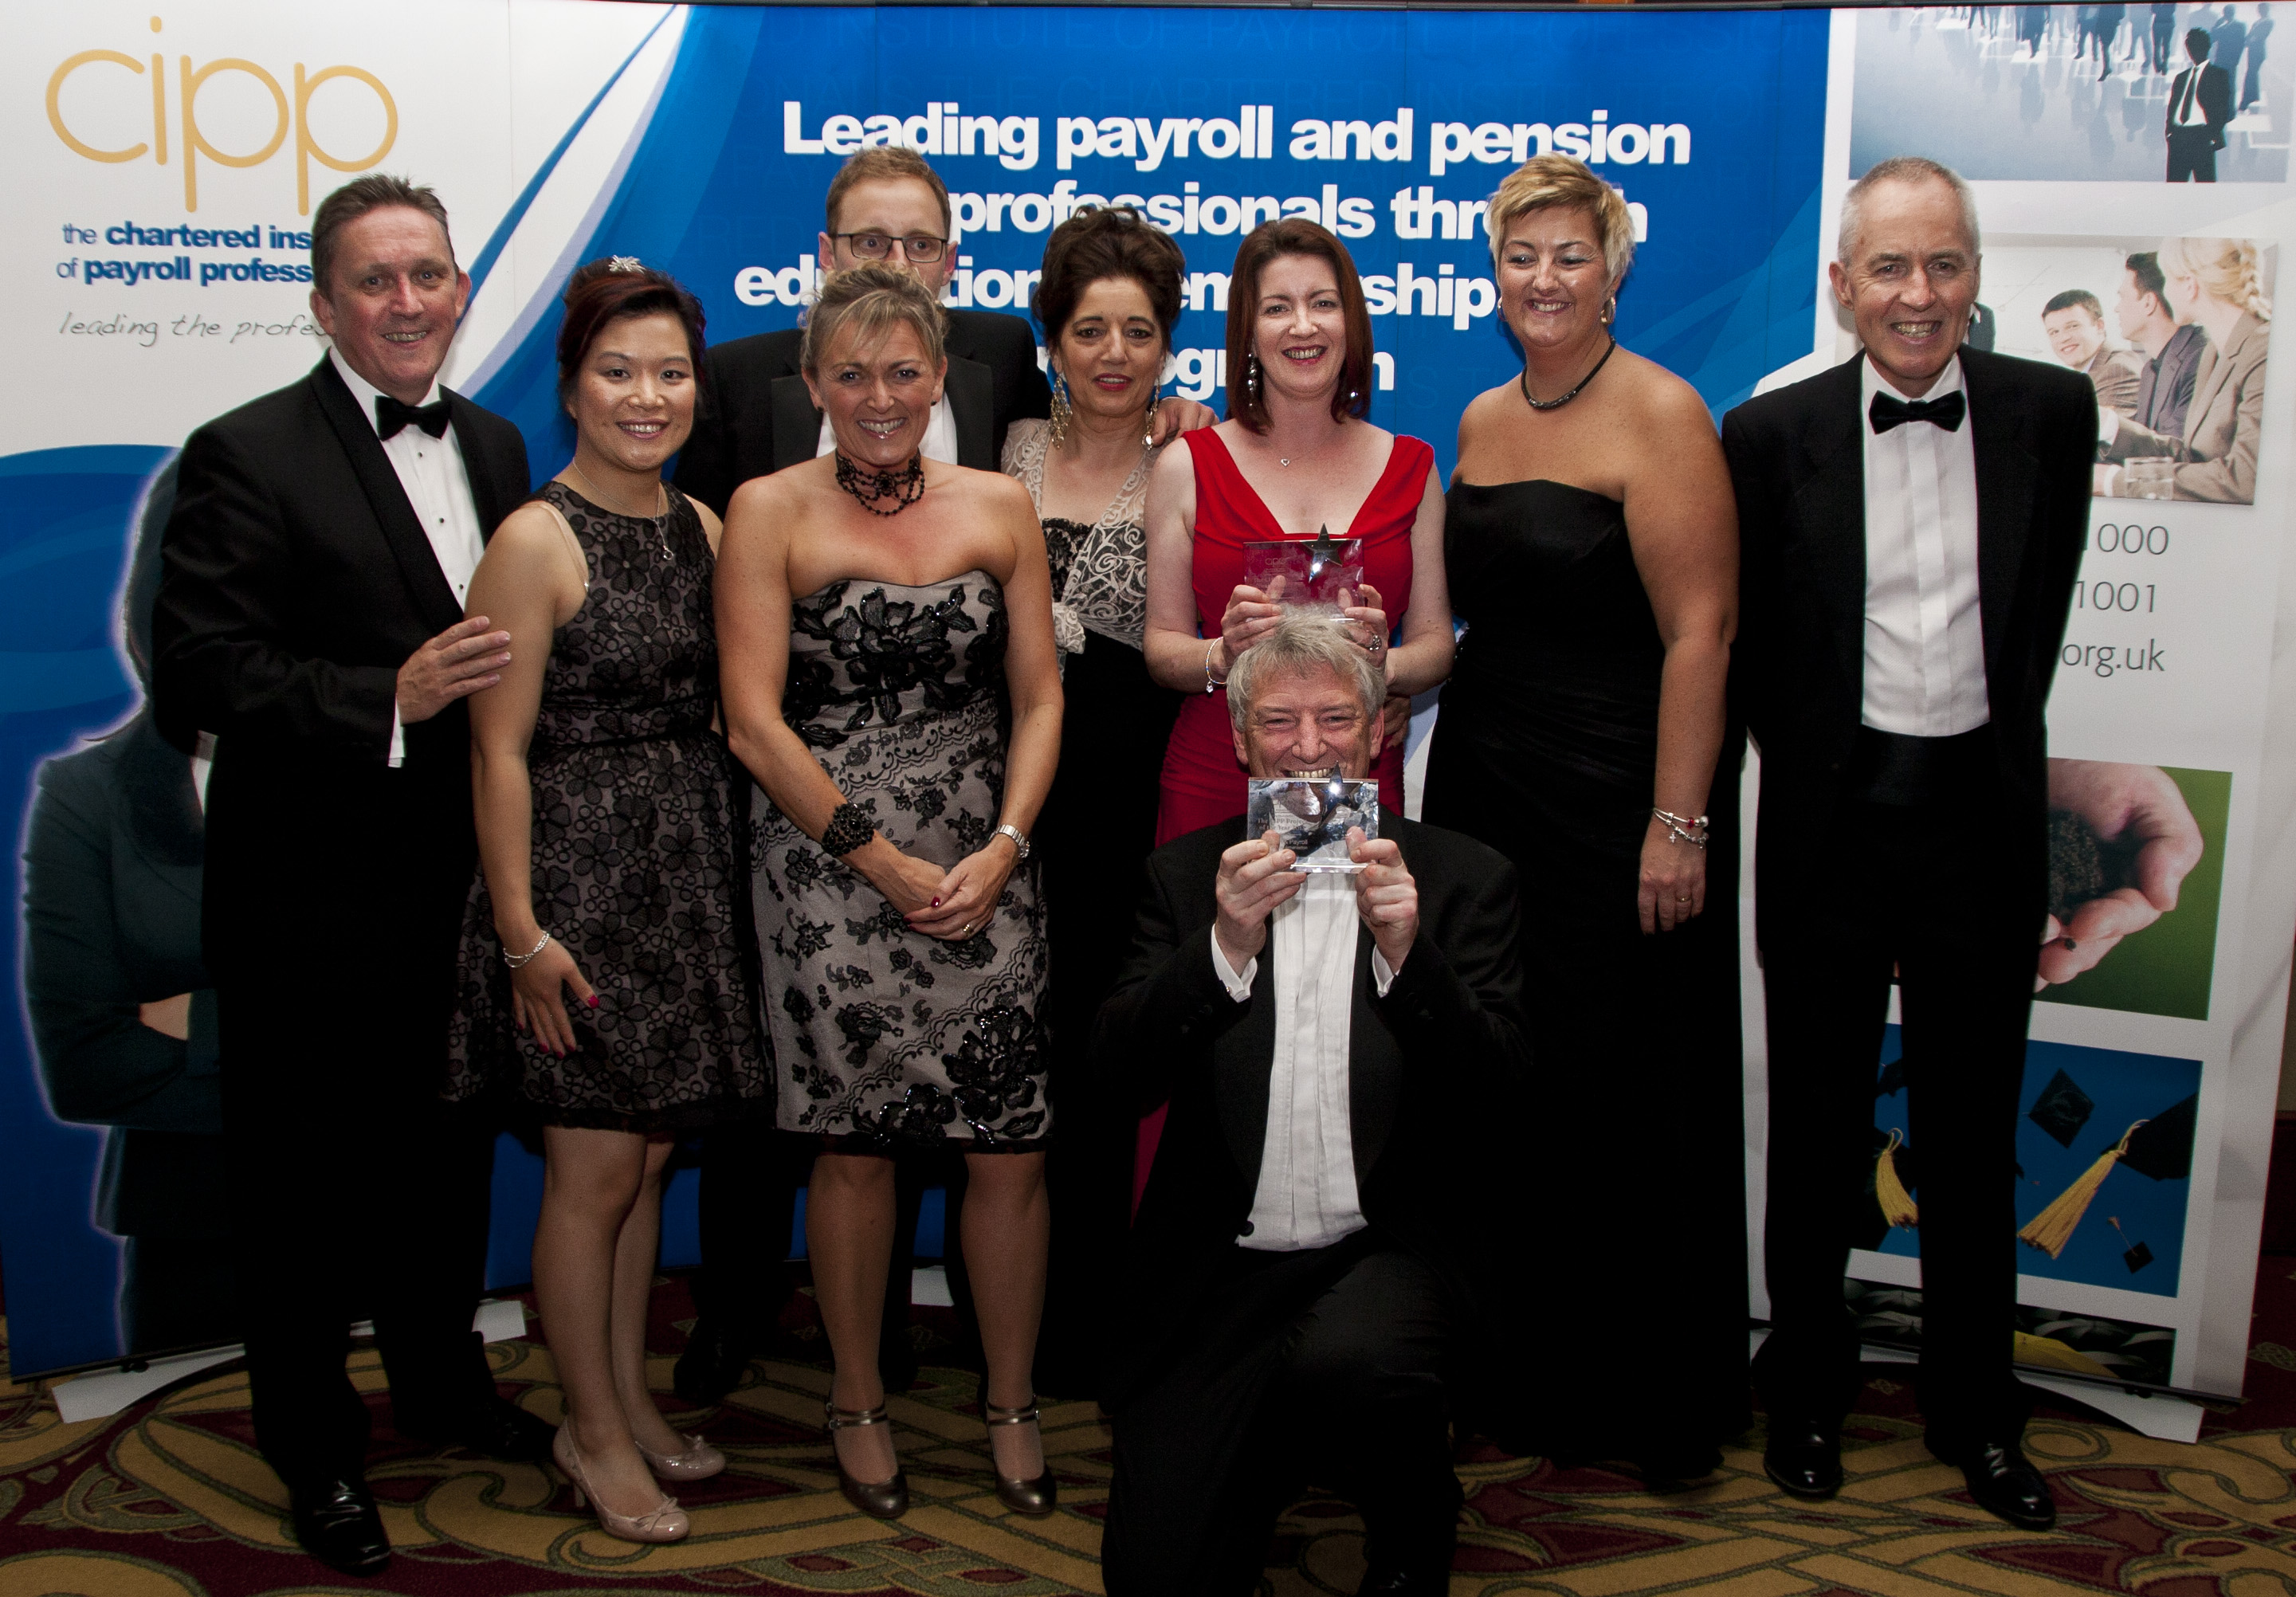 The Cintra team and their two awards at the CIPP Awards evening